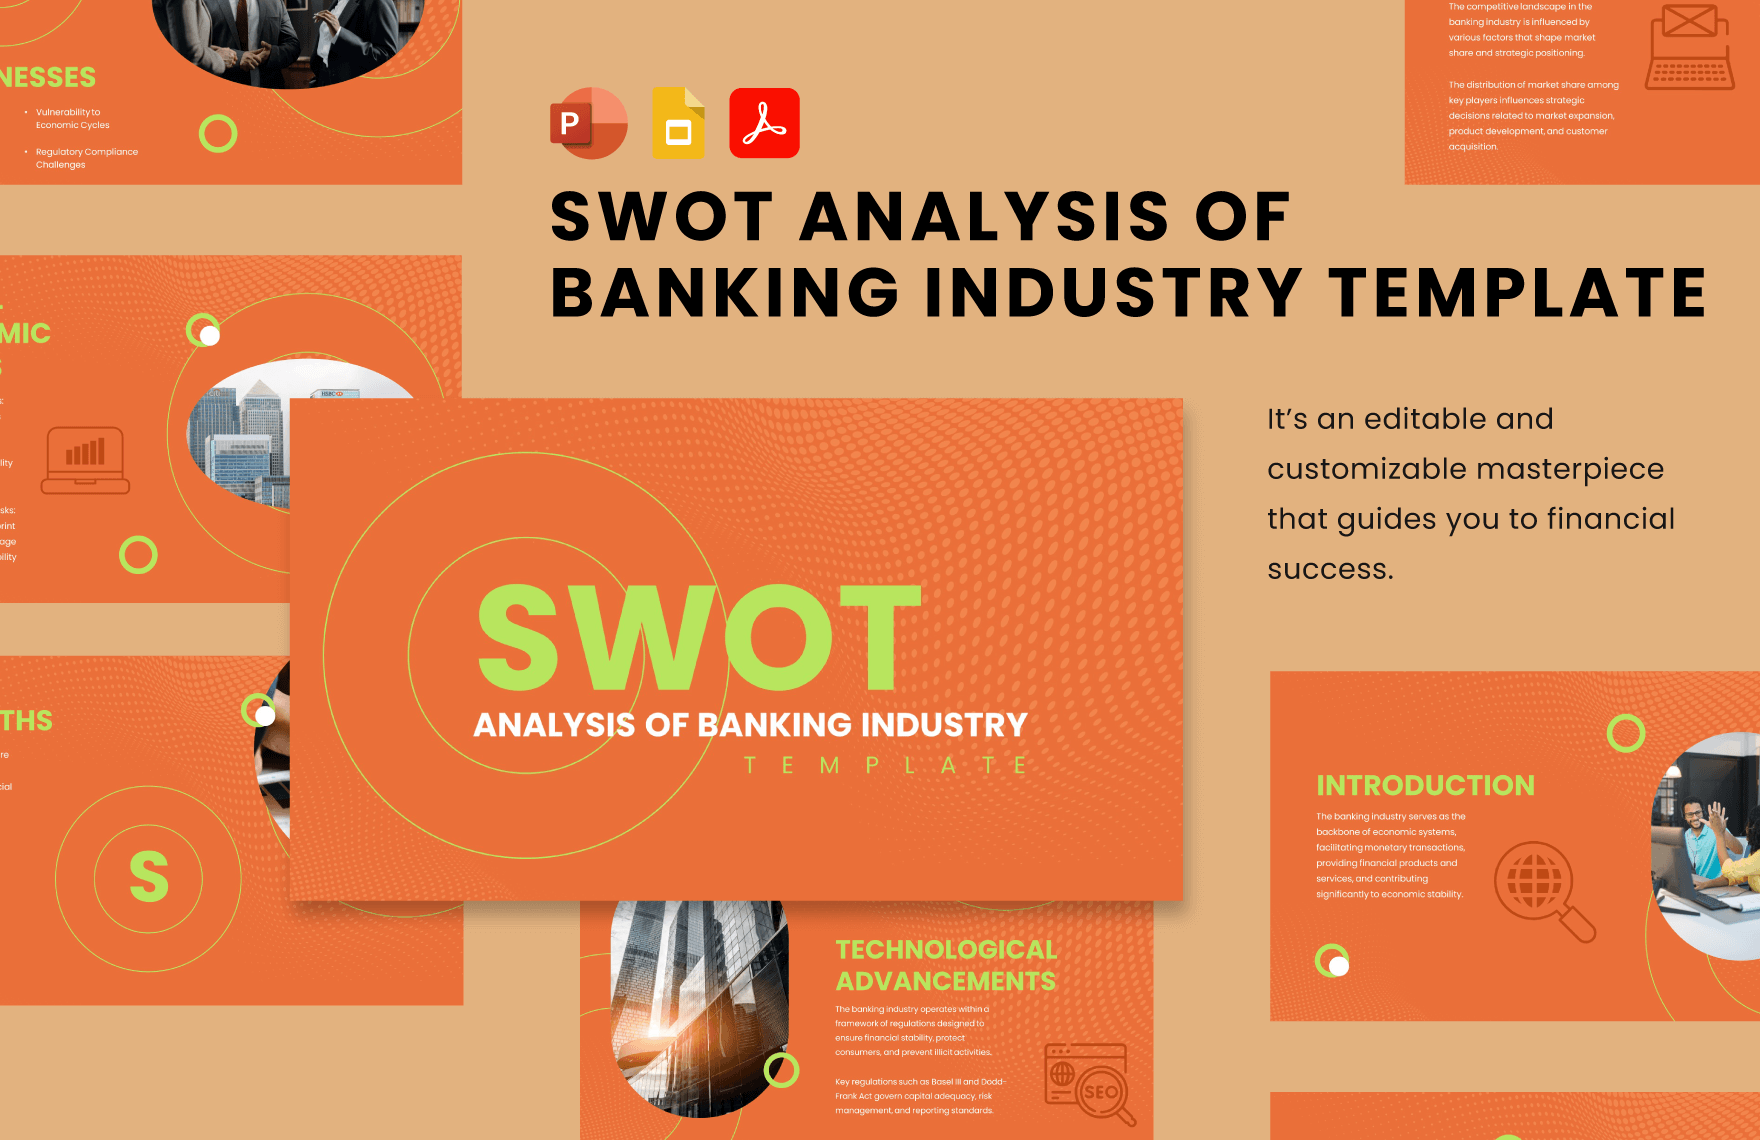 SWOT Analysis of Banking Industry Template